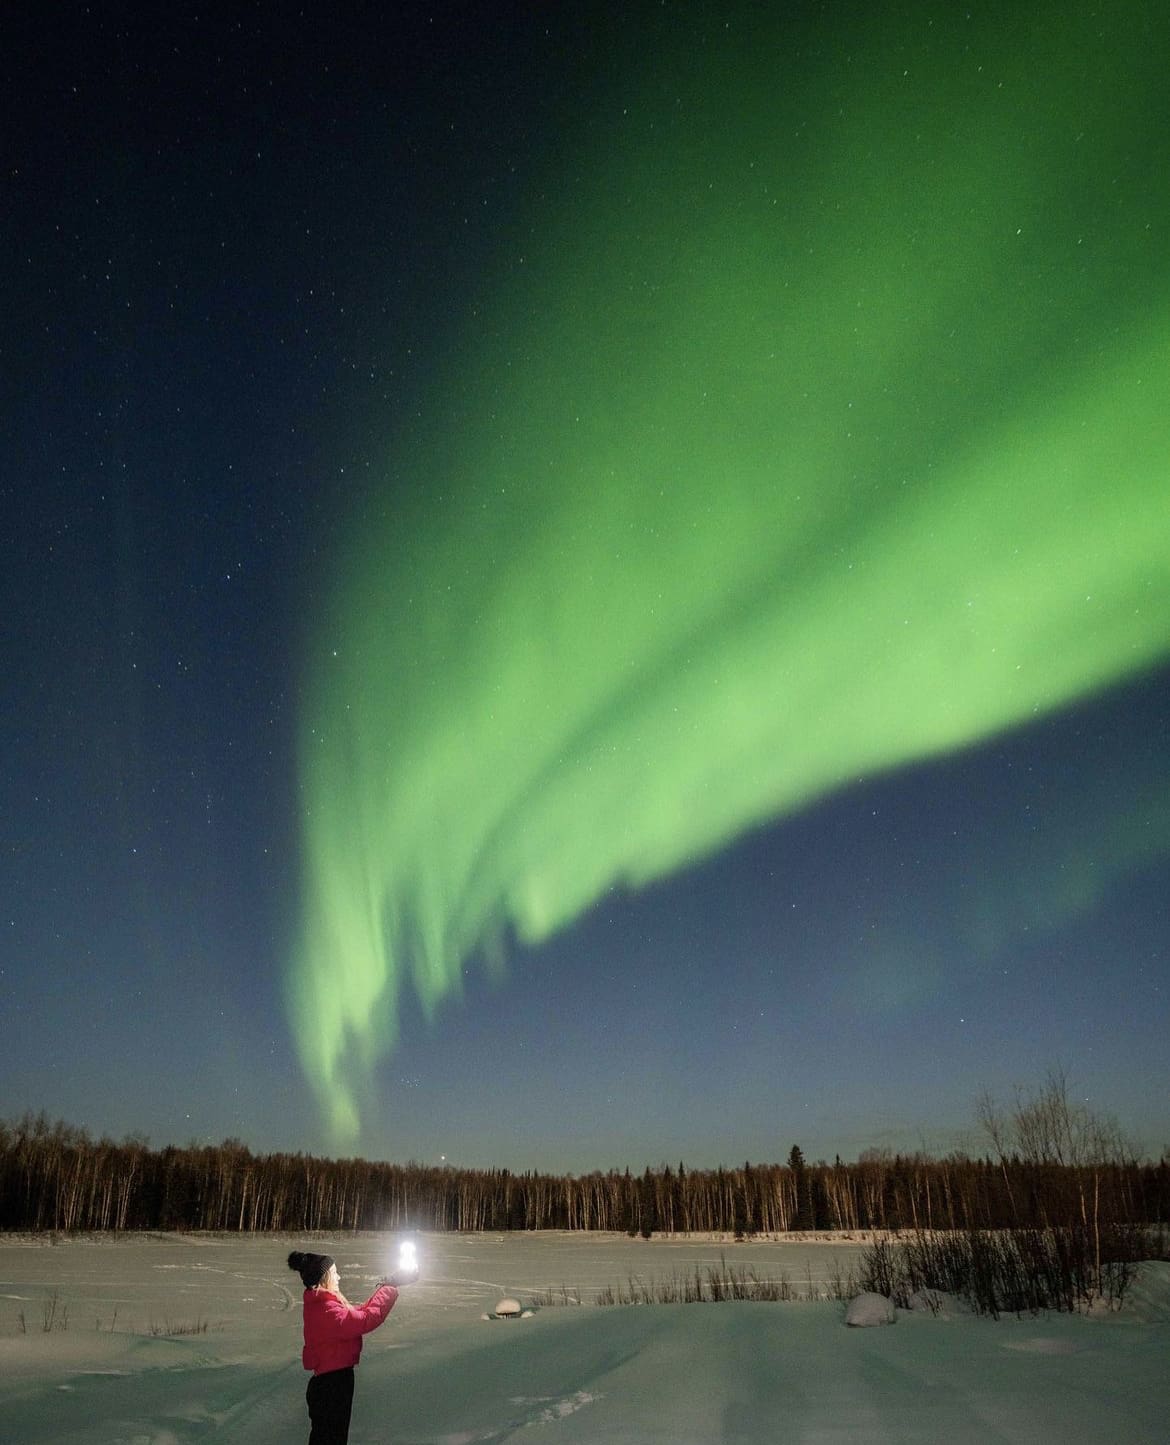 Experiencing the Northern Lights